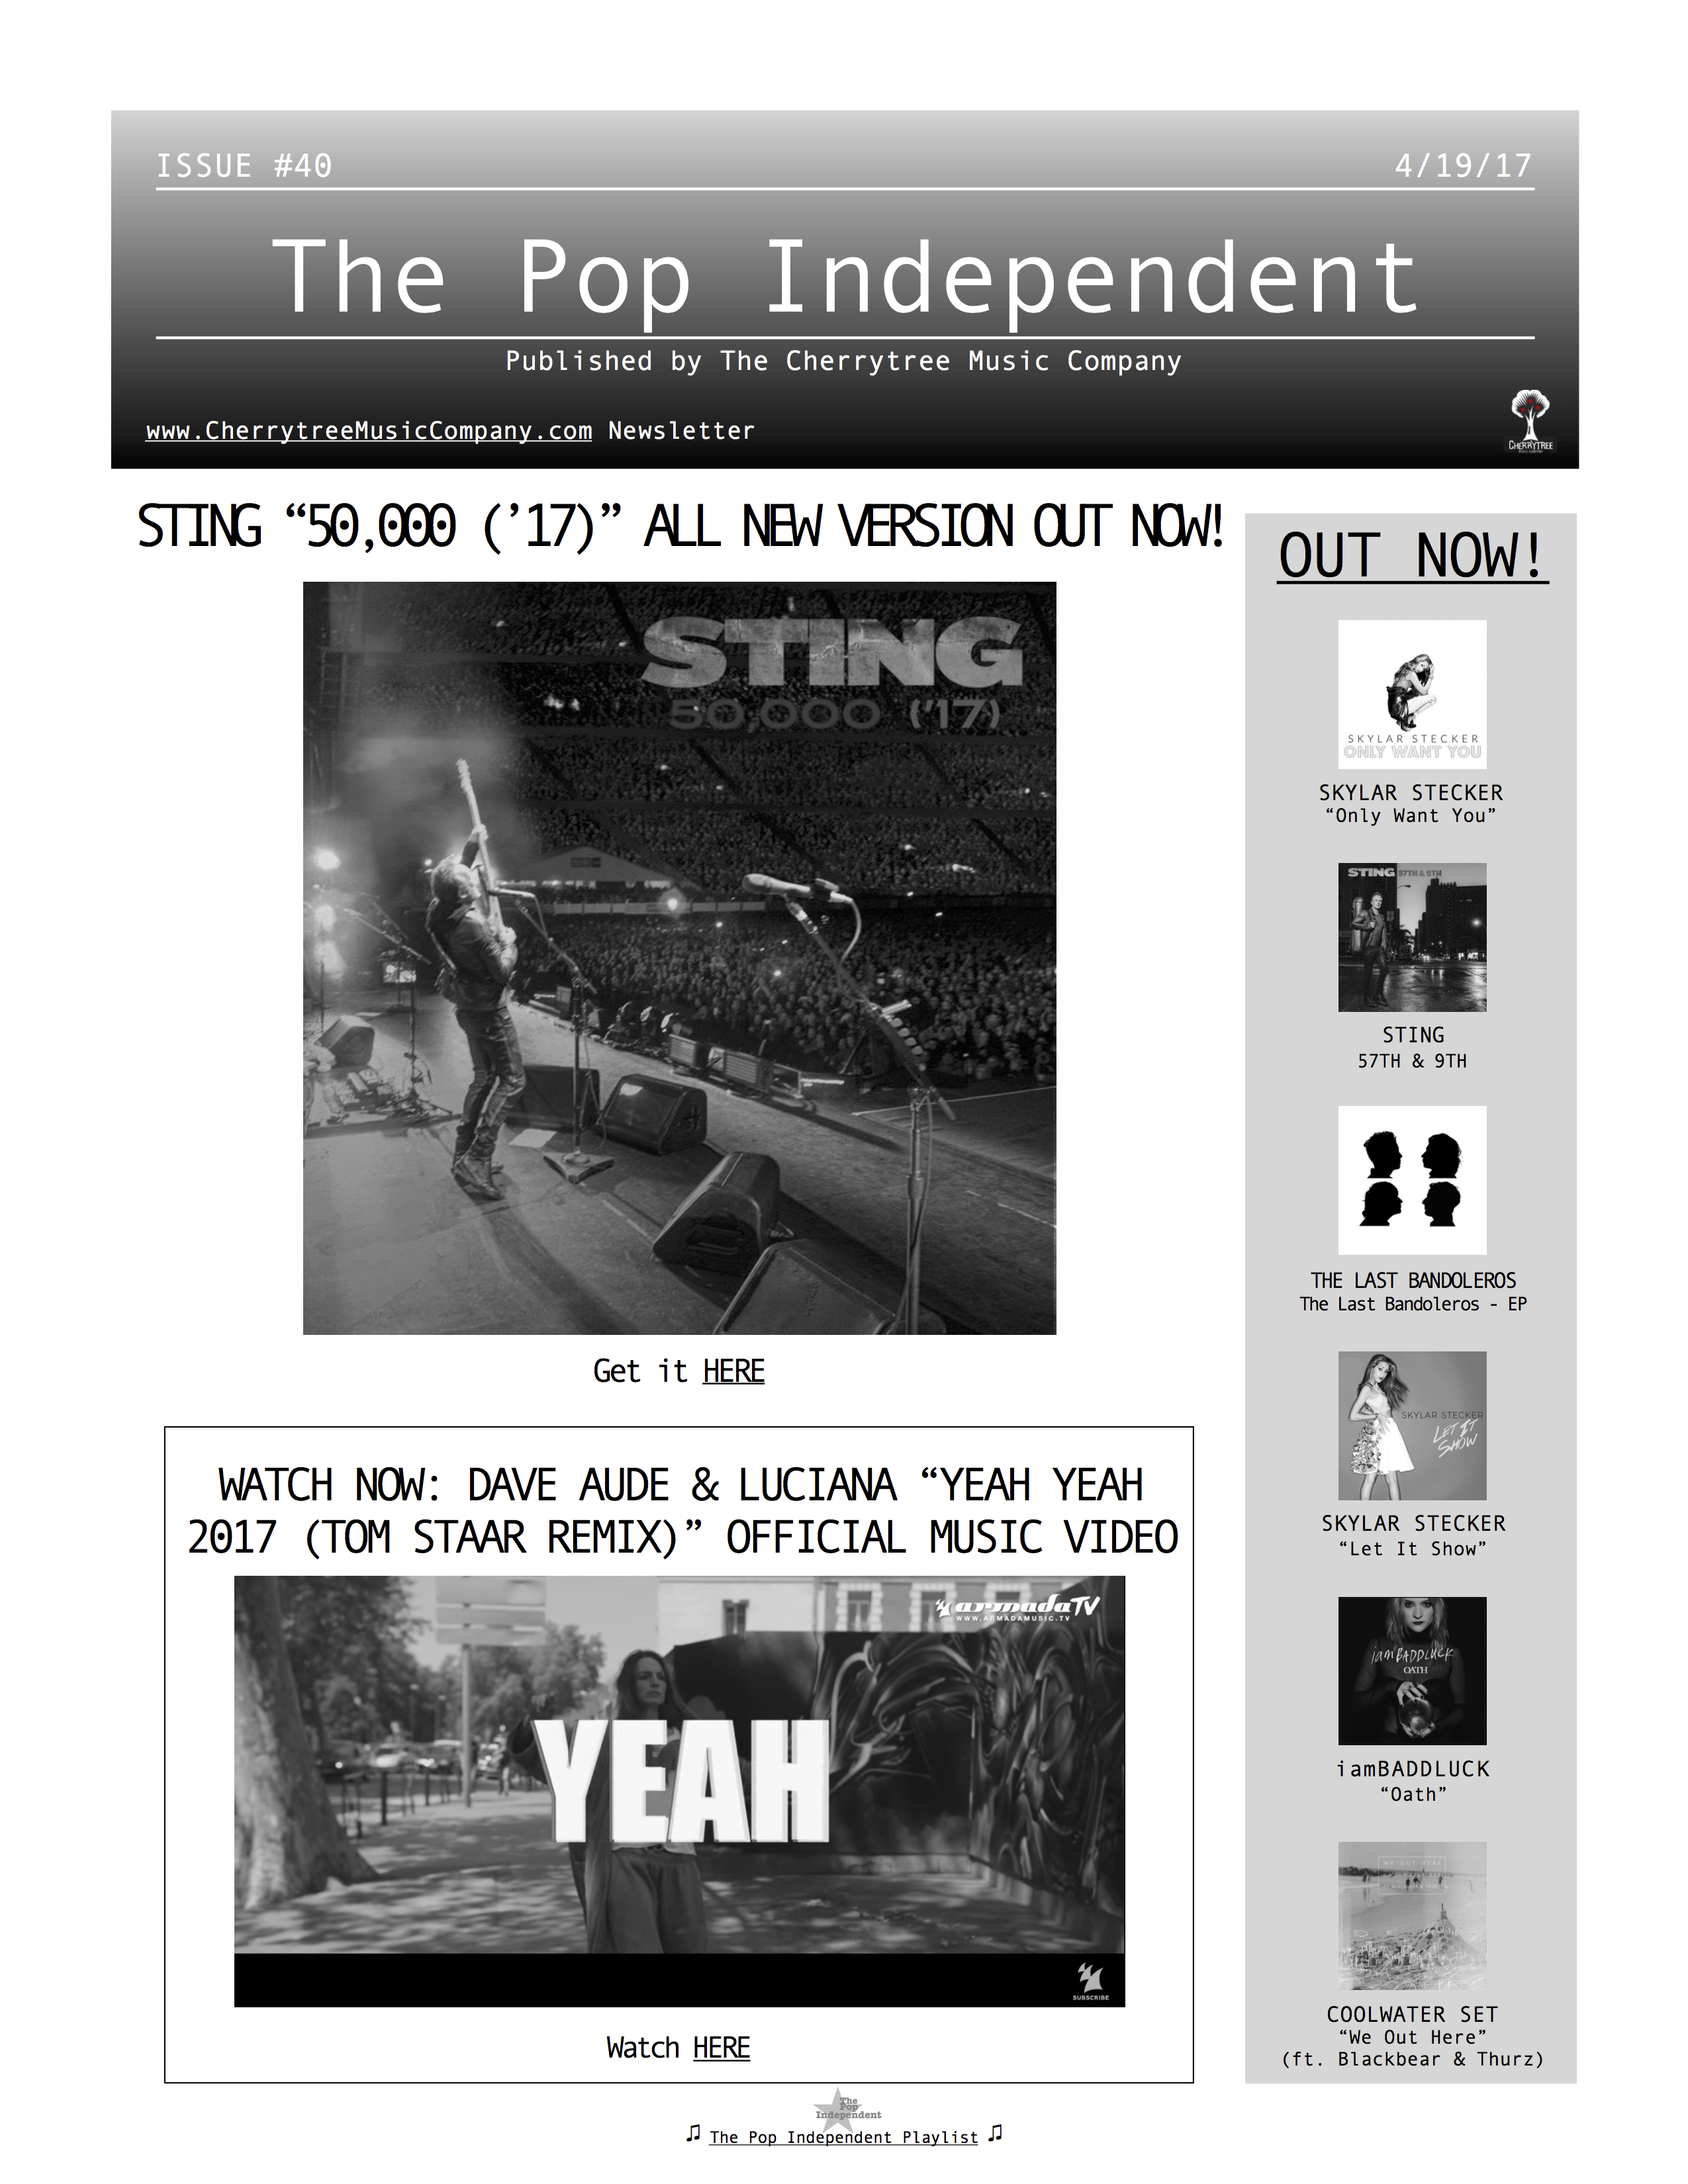 The Pop Independent, issue 40